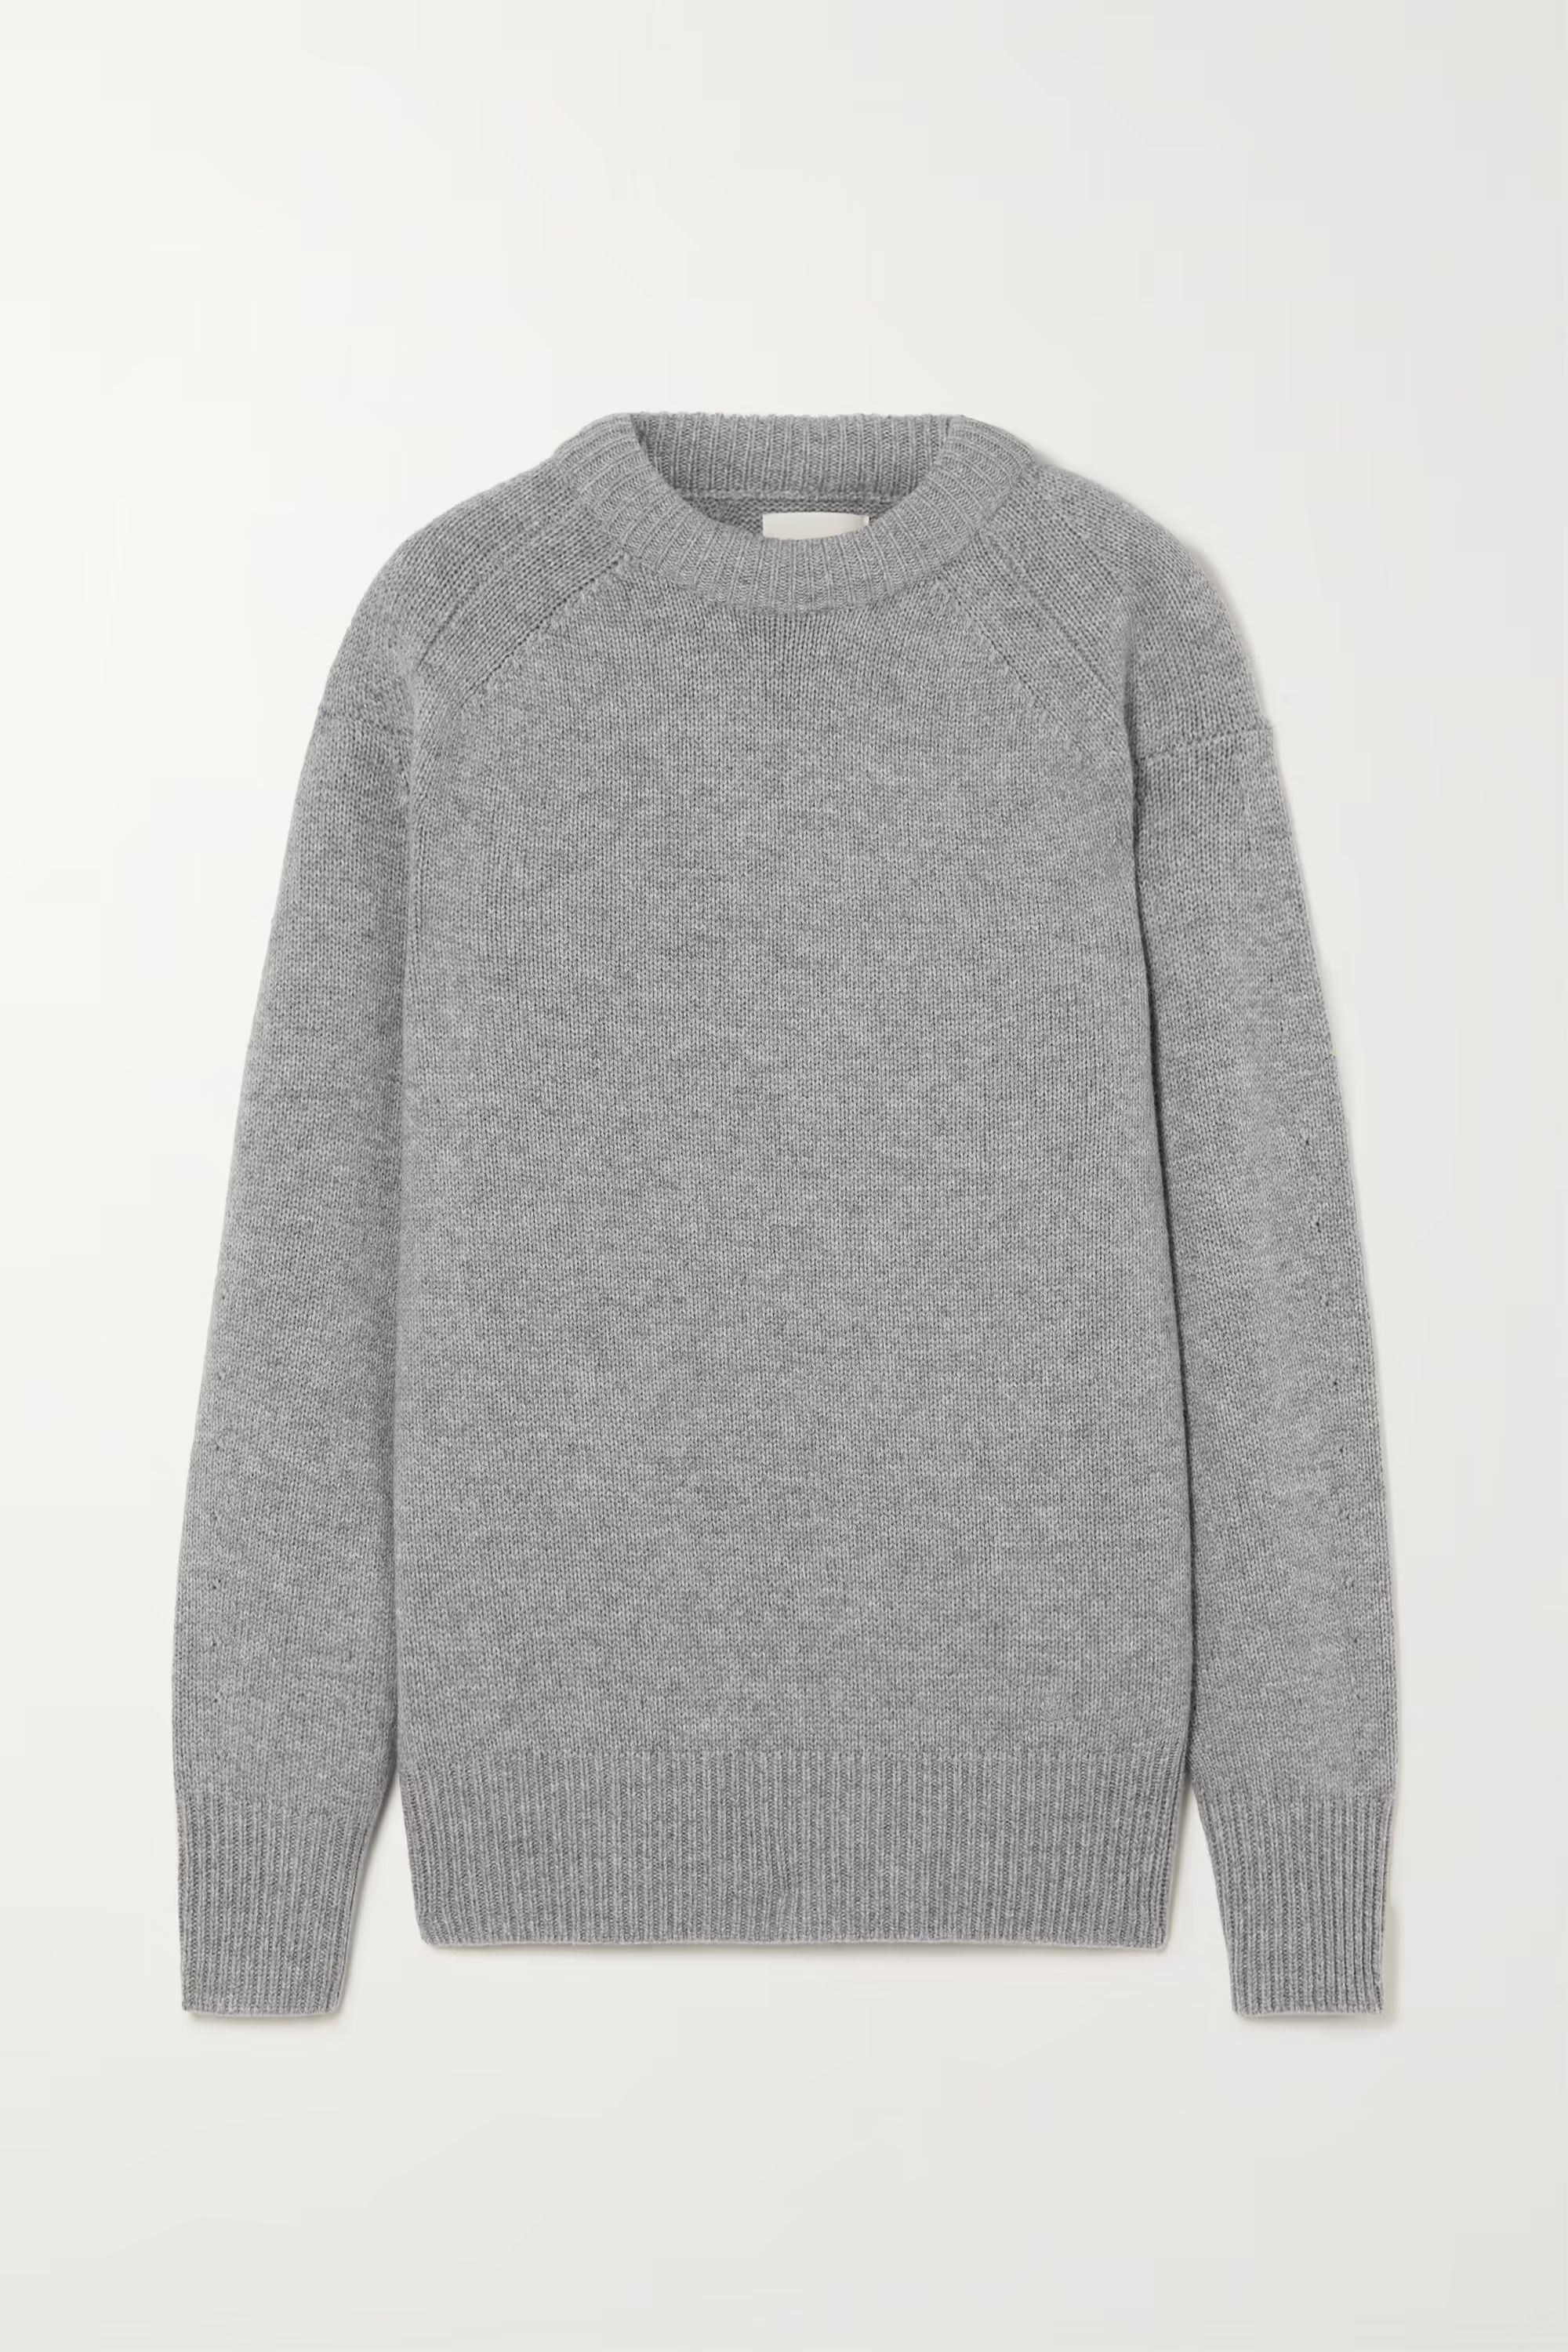 Ratino wool and cashmere-blend sweater | NET-A-PORTER (US)